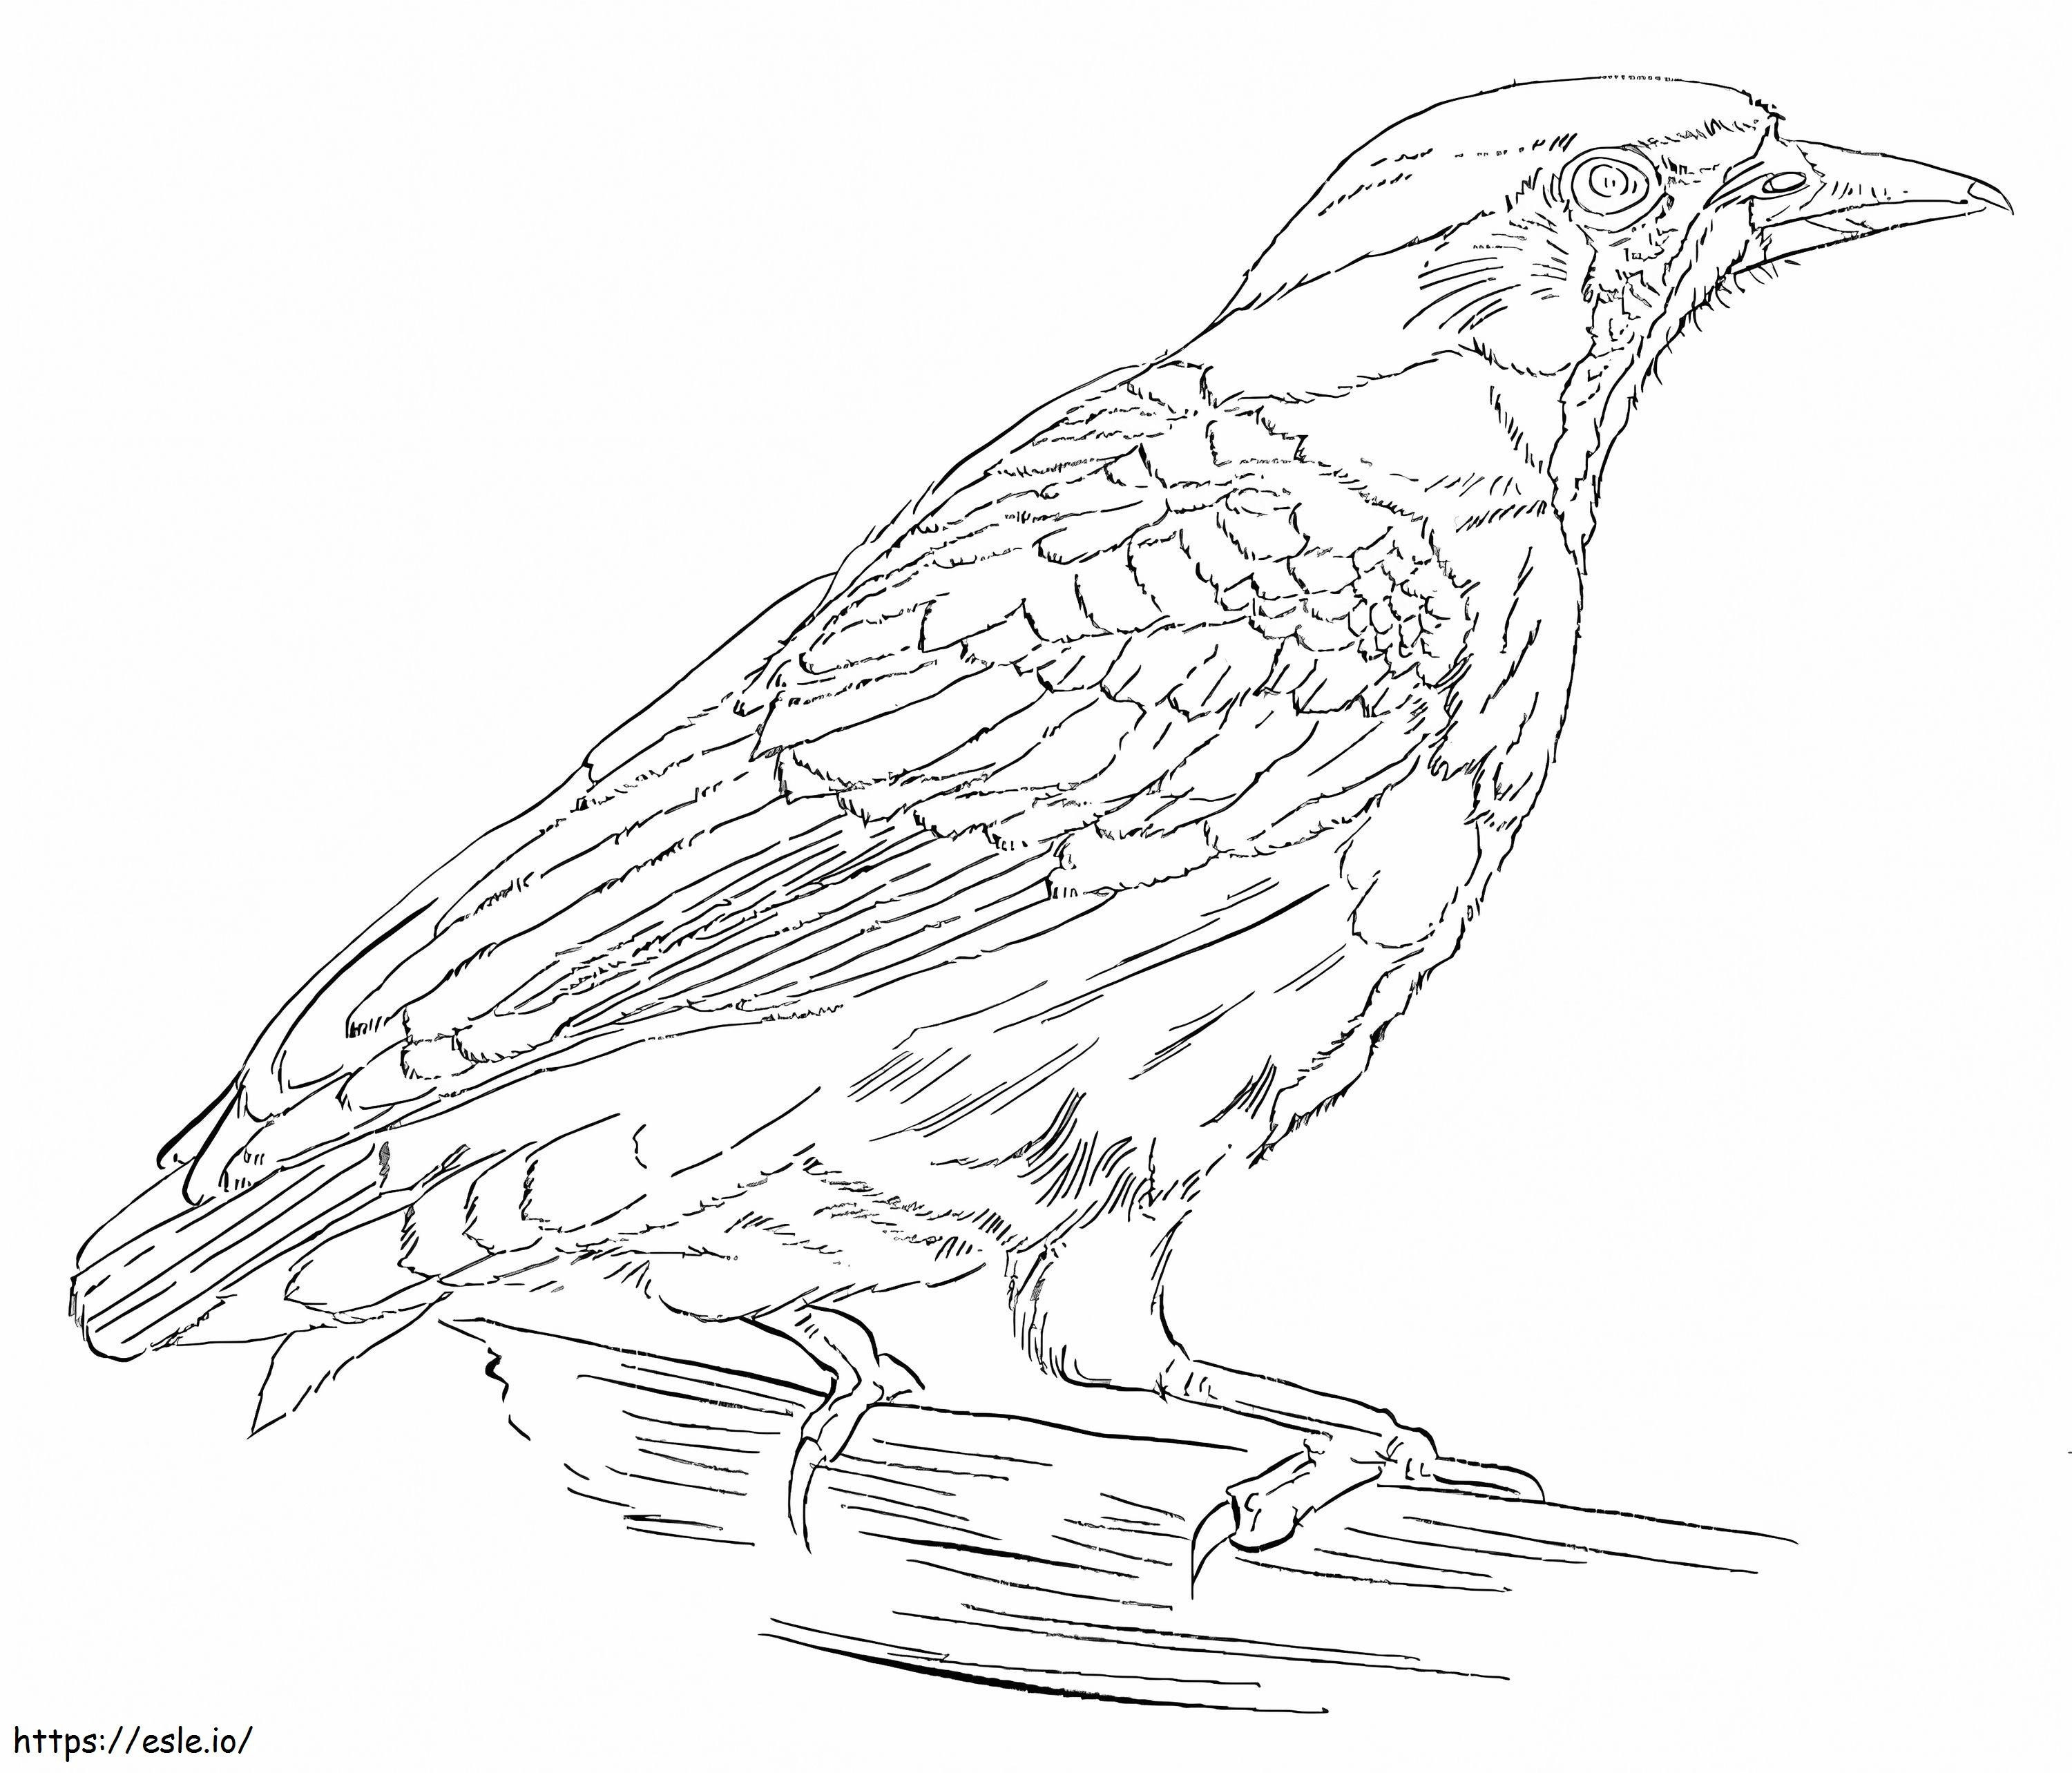 Forest Raven coloring page